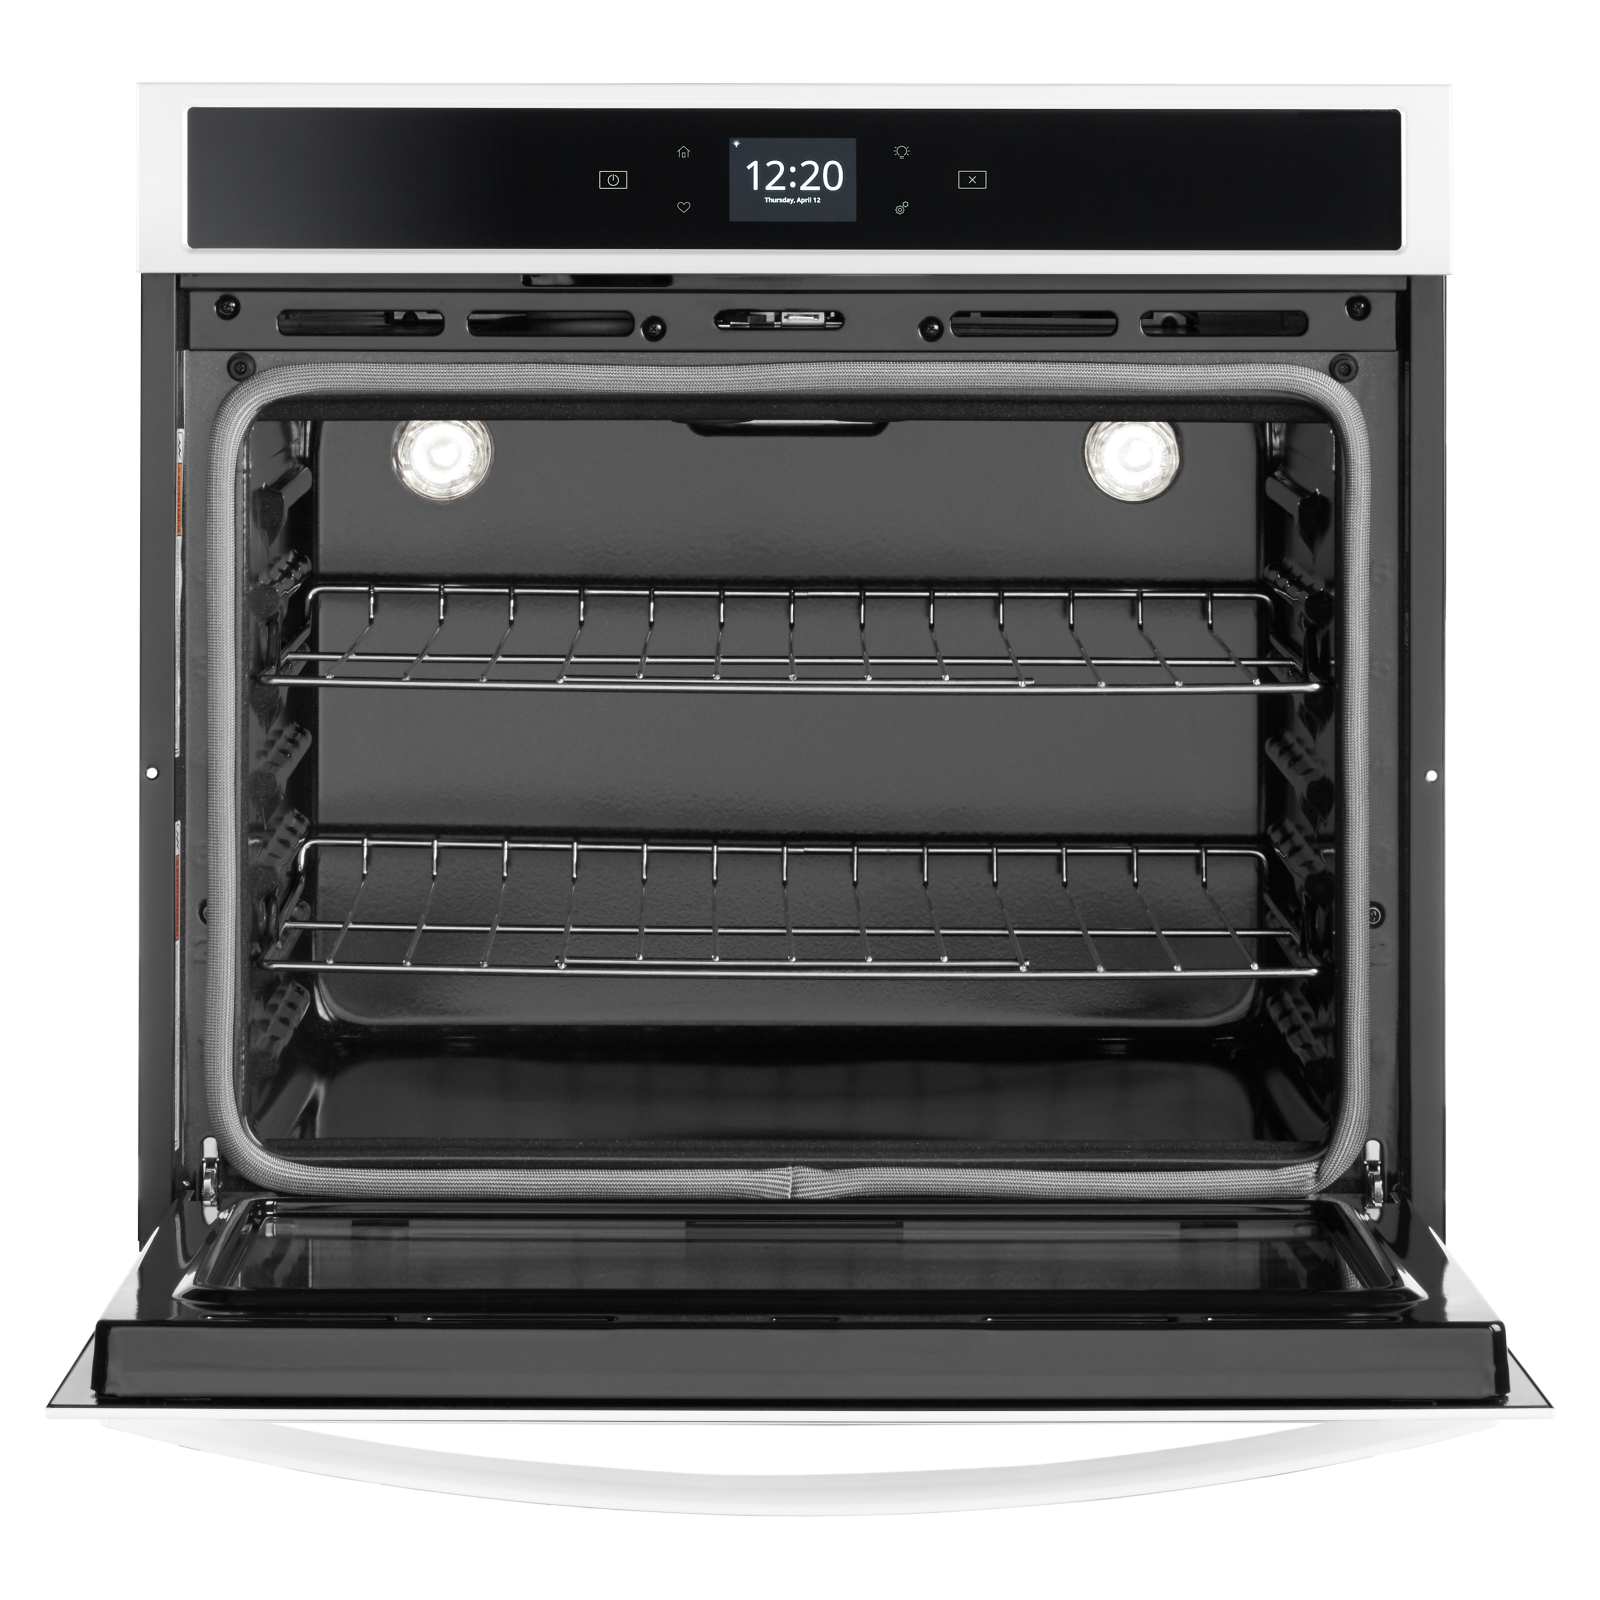 Whirlpool - 5 cu. ft Single Wall Oven in White - WOS51EC0HW